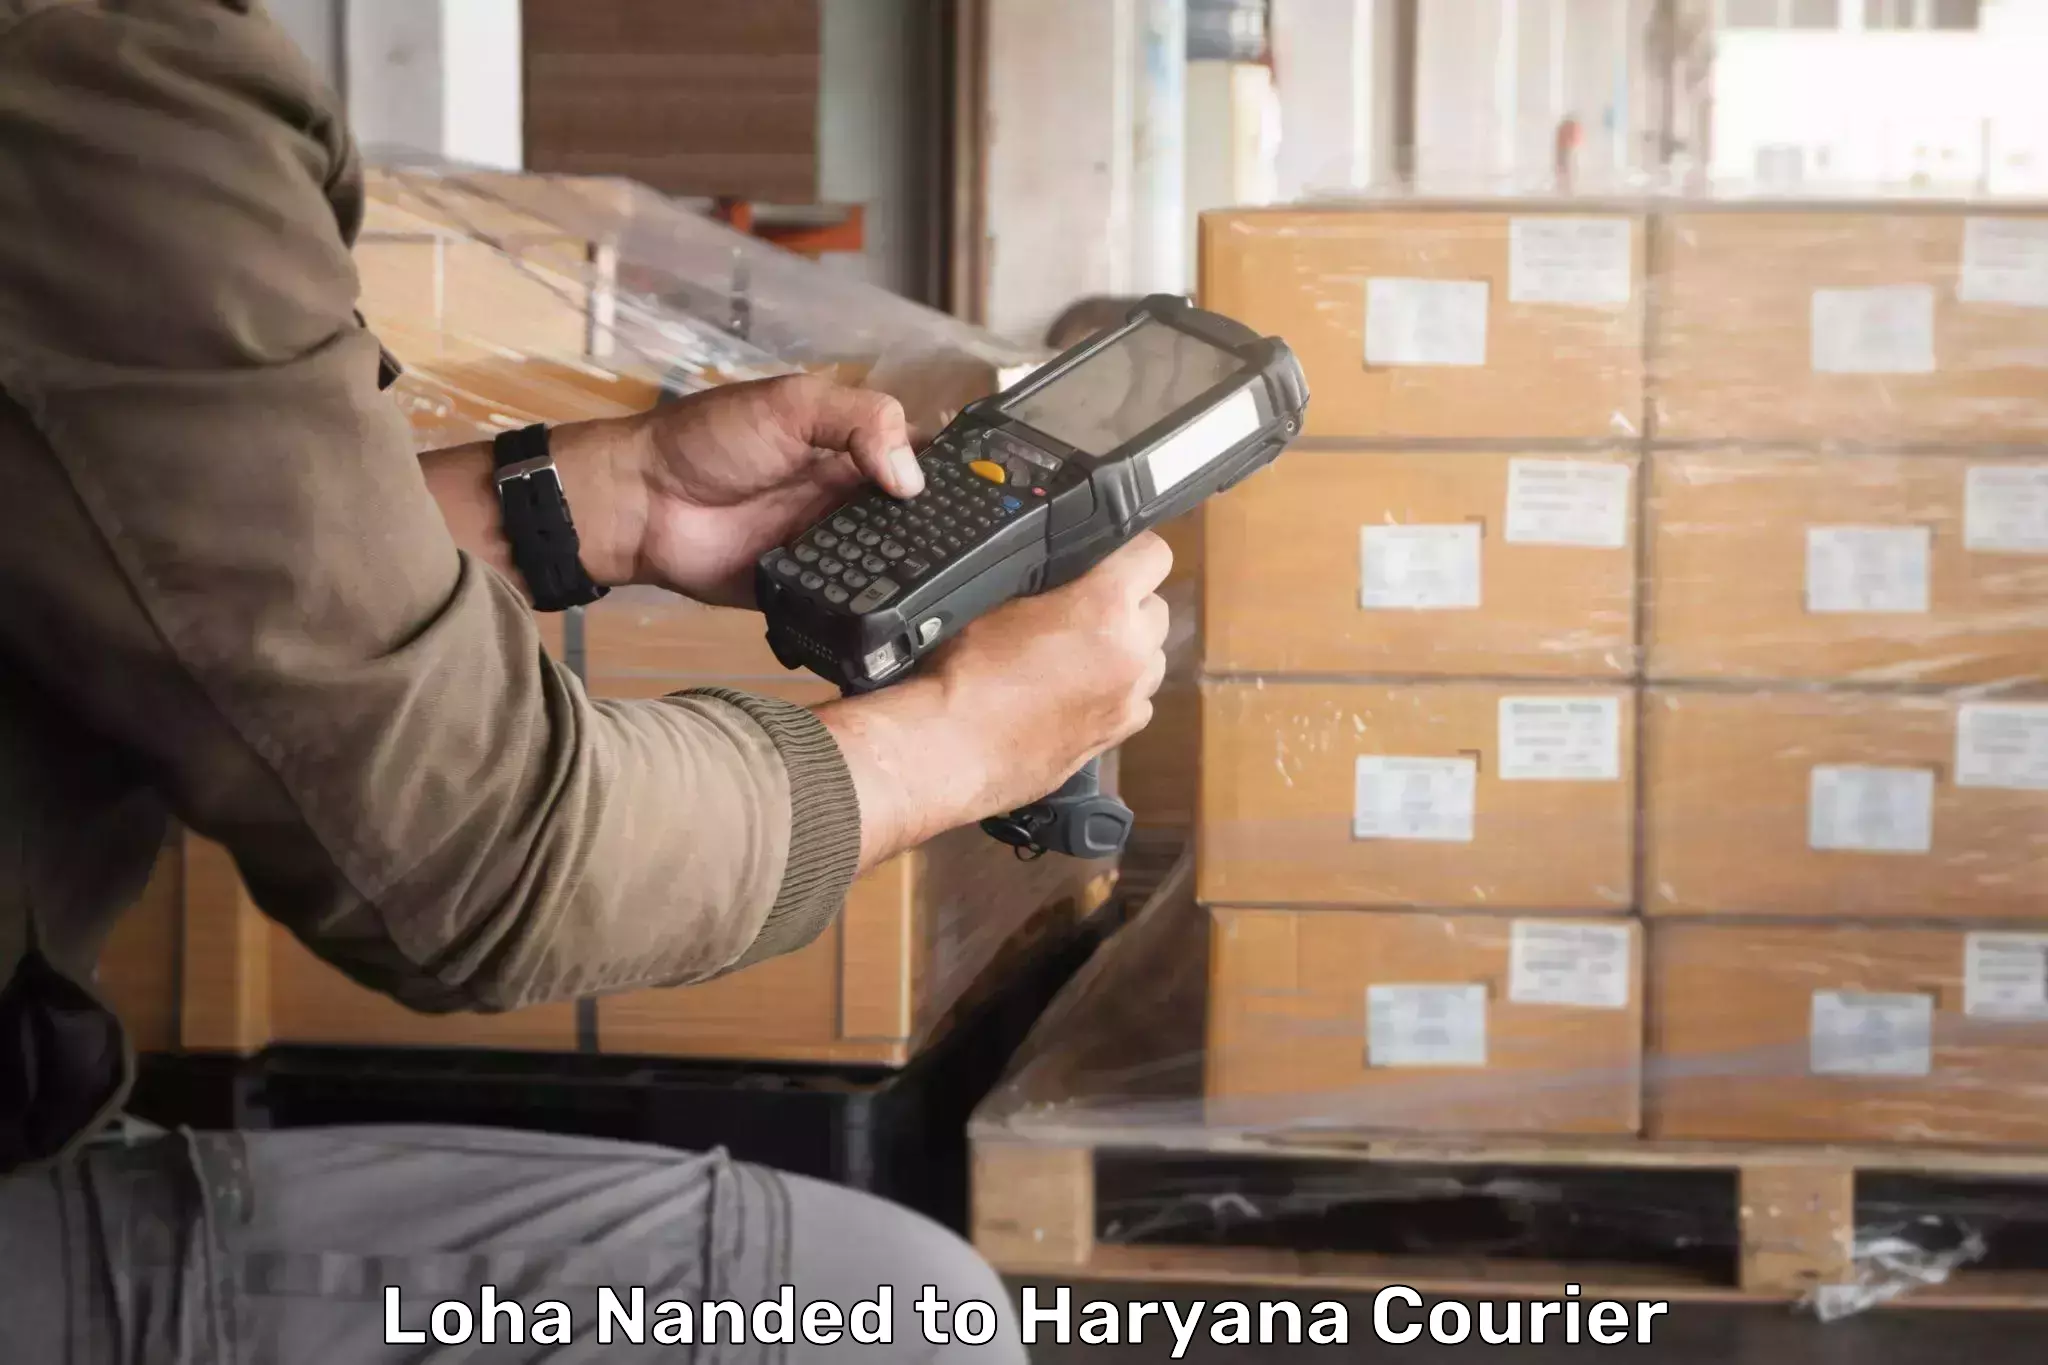 Business shipping needs Loha Nanded to Odhan